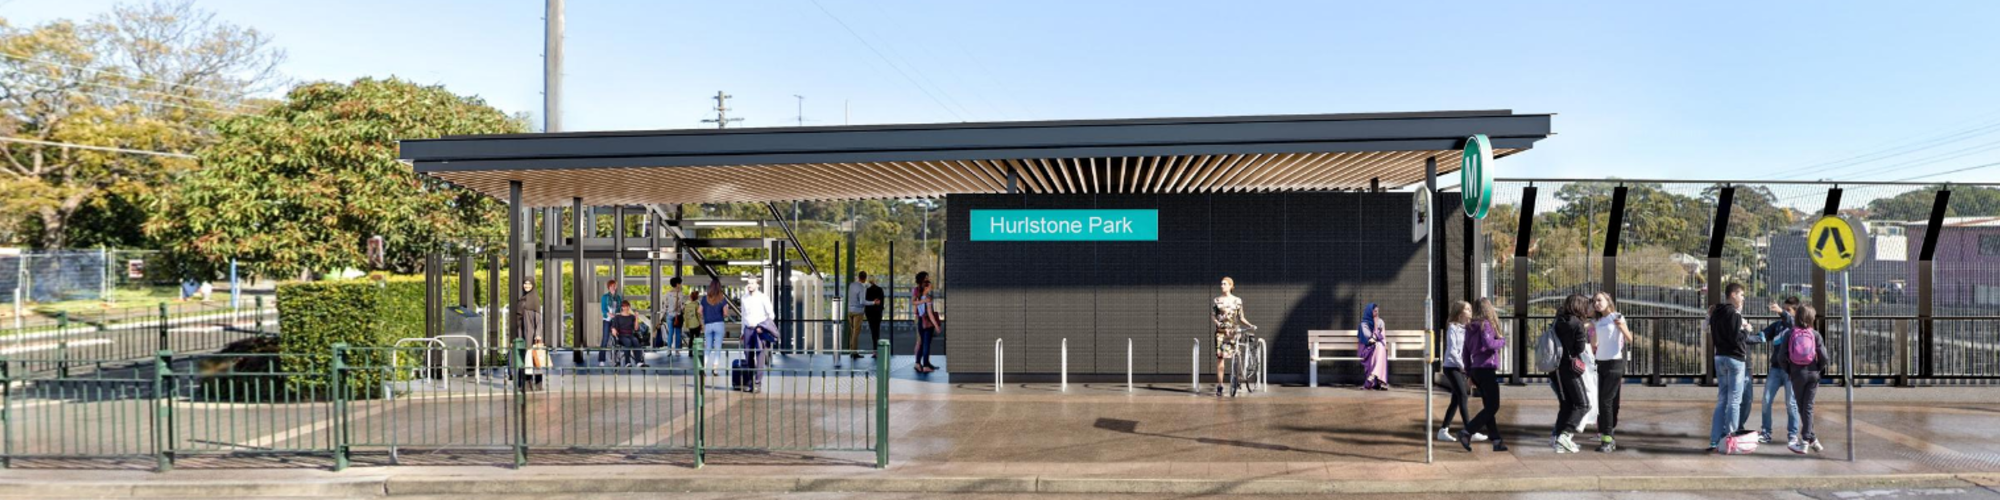 Artist's impression of Sydney Metro upgraded Hurlstone Park Station as viewed from the platform.